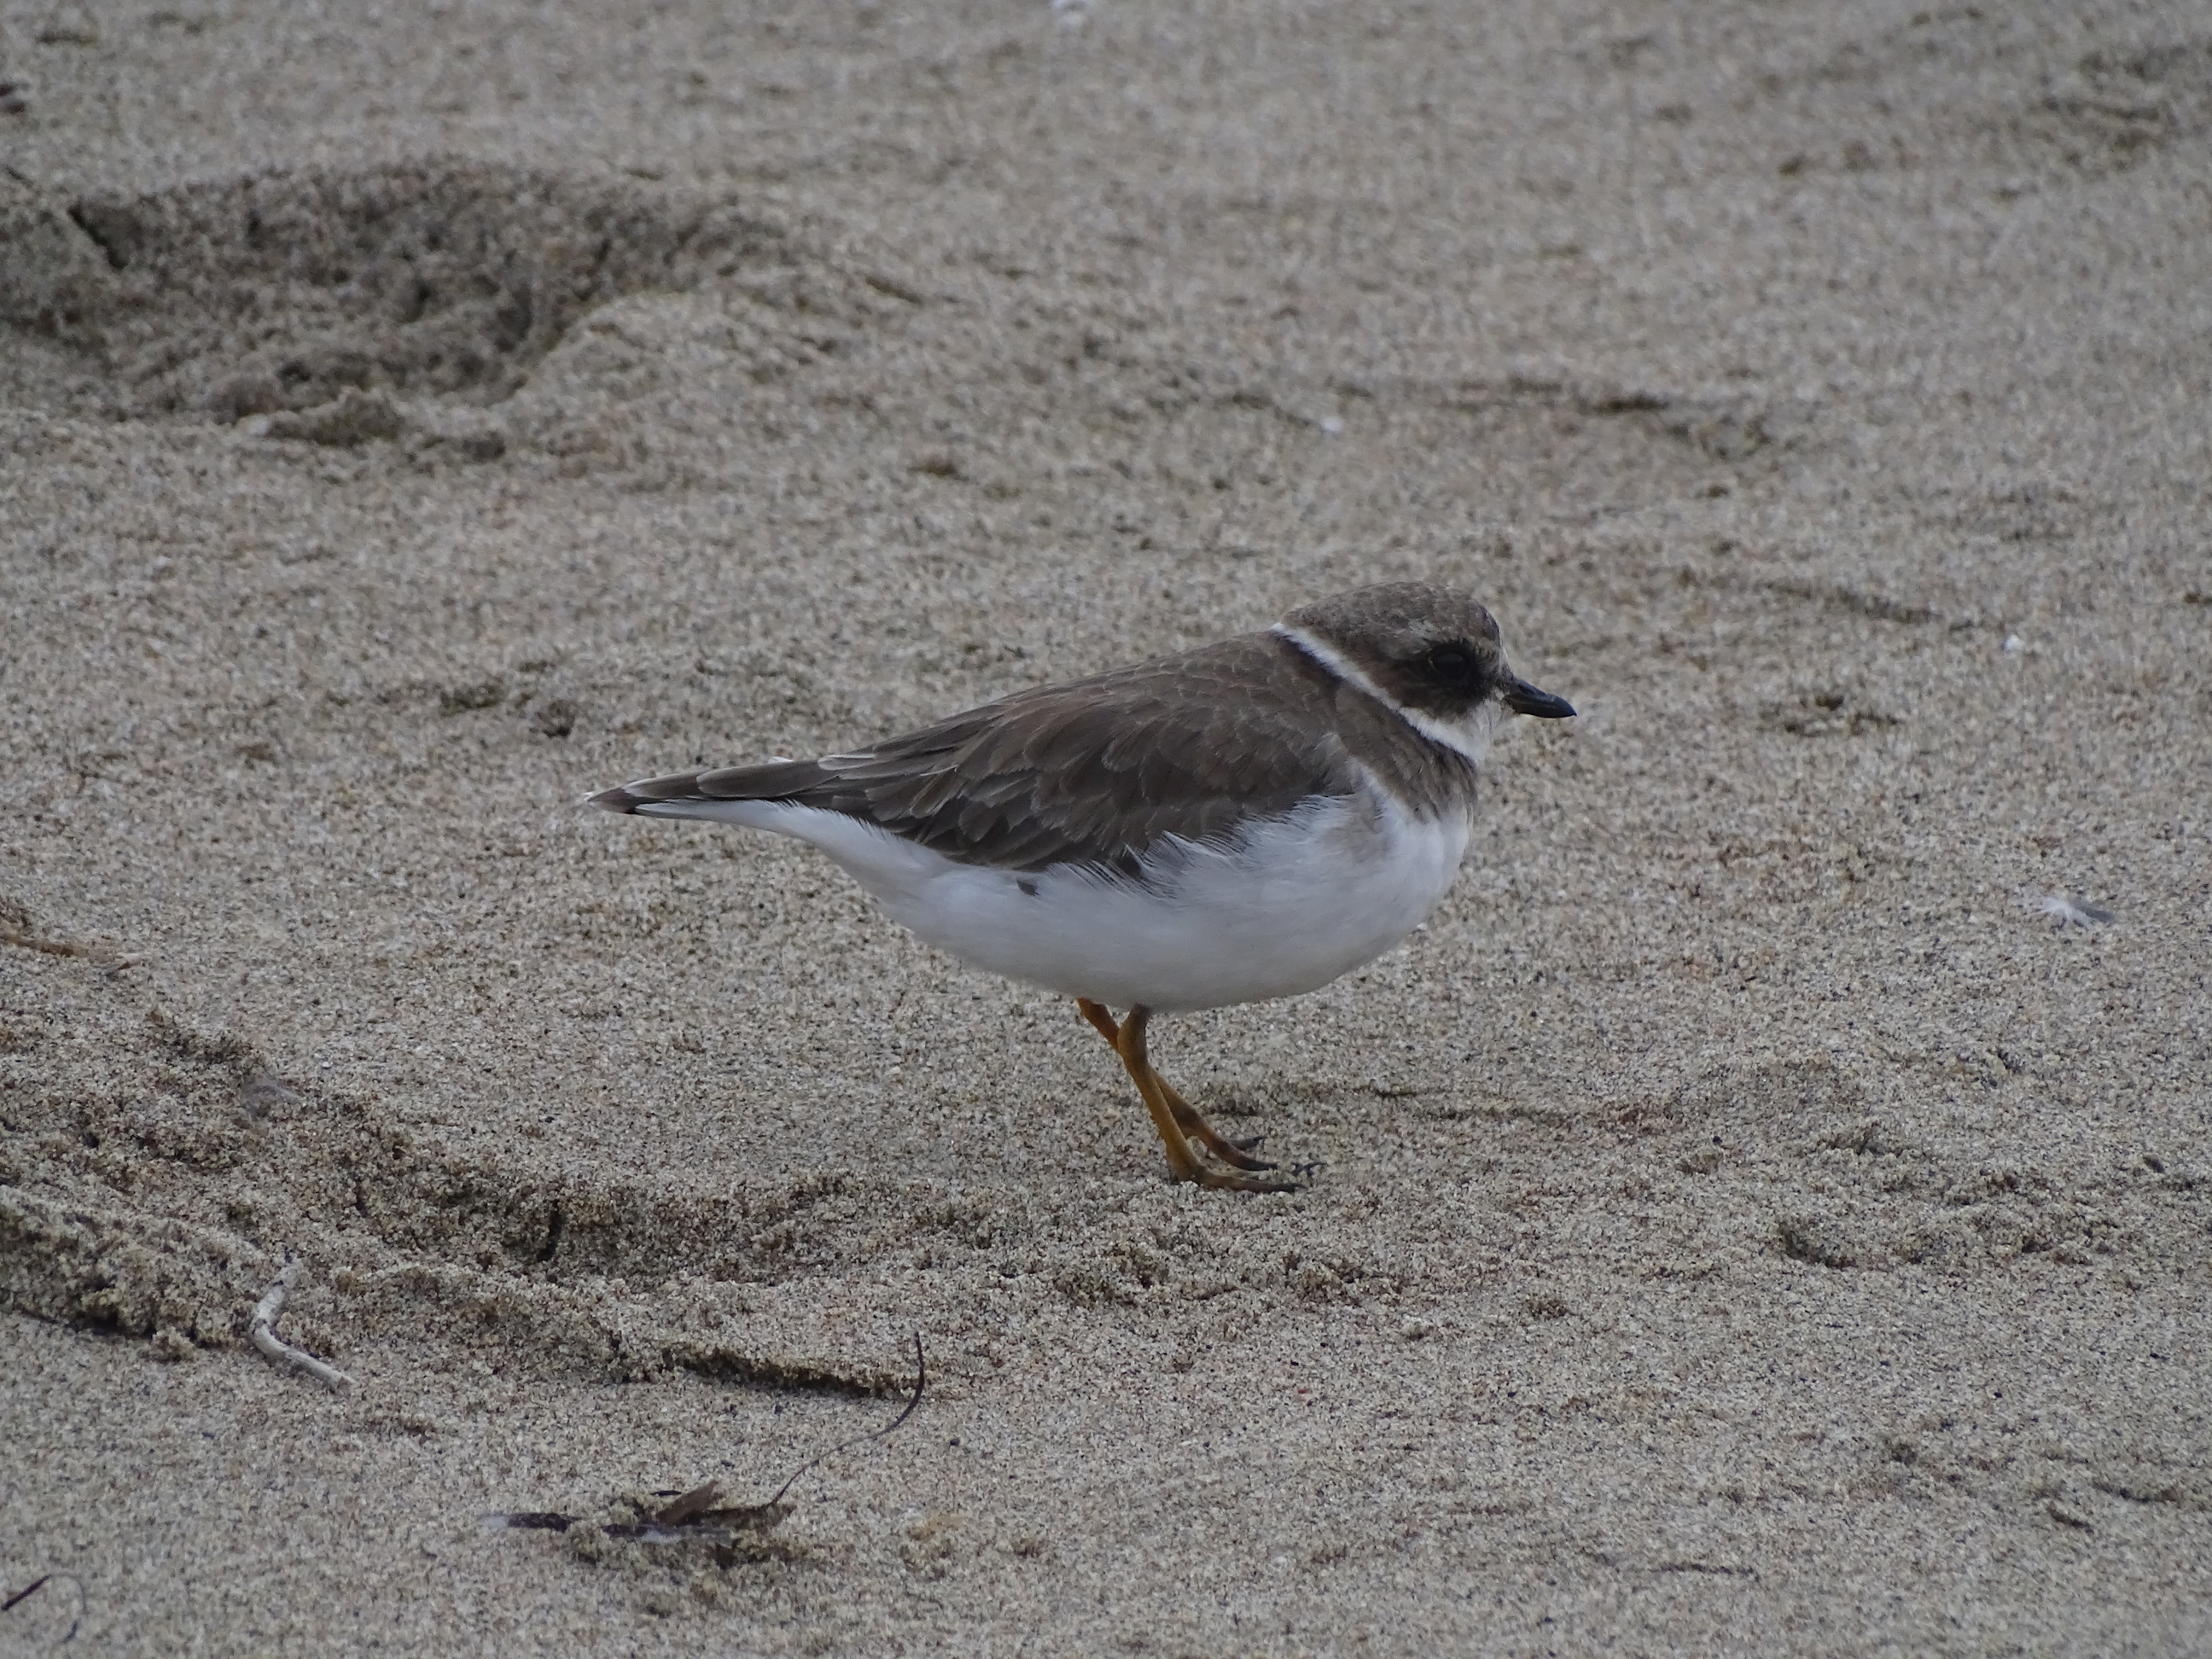 A photo of a small brown shorebird with a white band around its neck standing on sand.